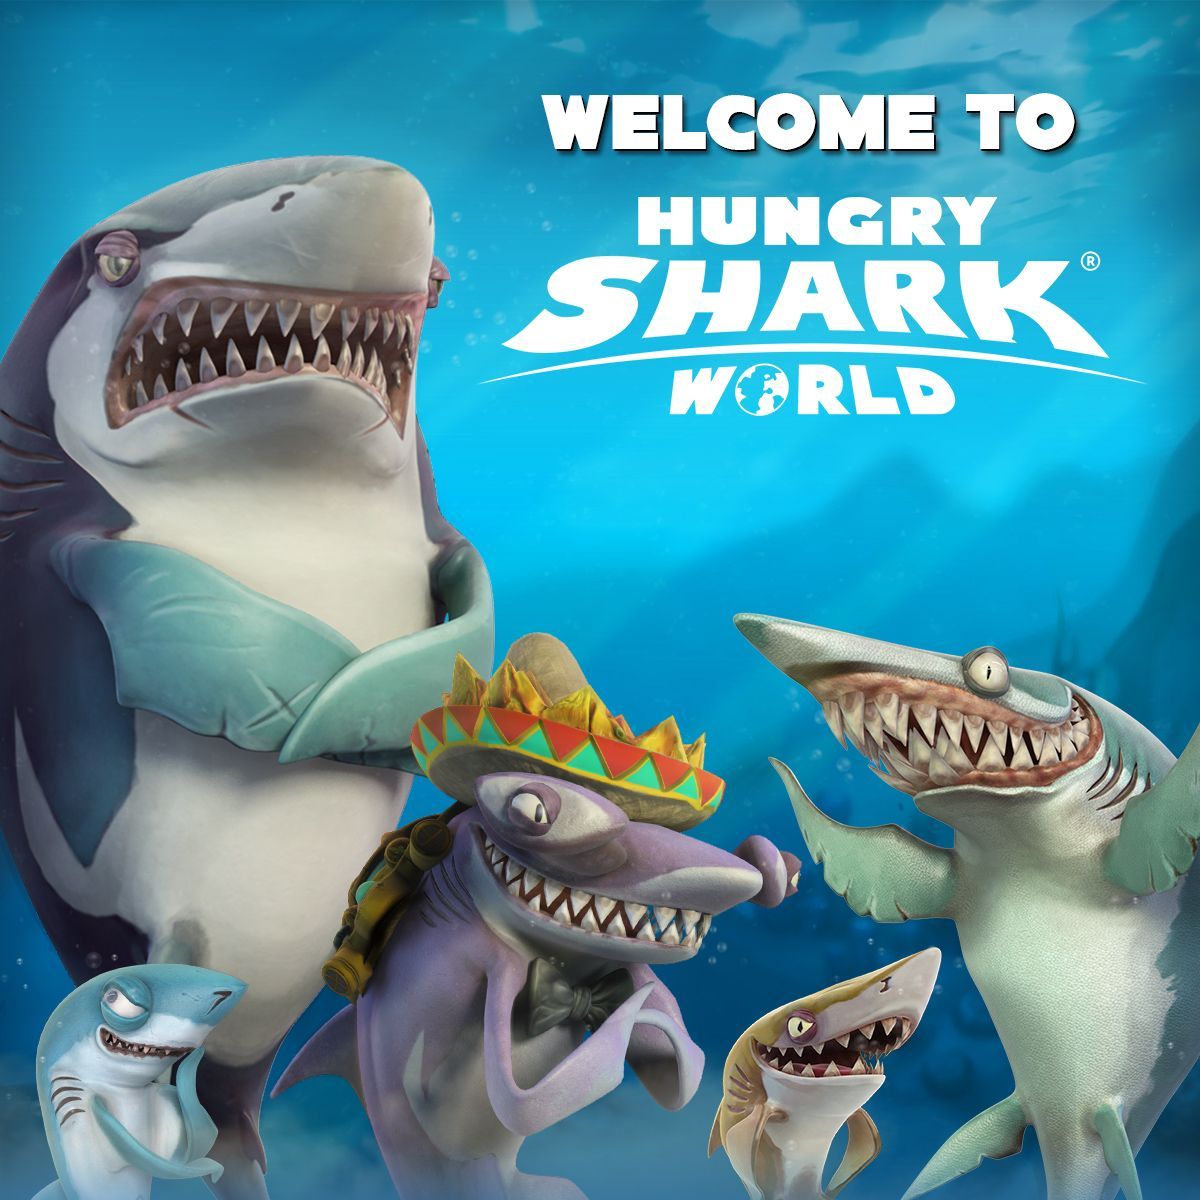 Welcome to the Hungry Shark World Board! Enjoy your stay